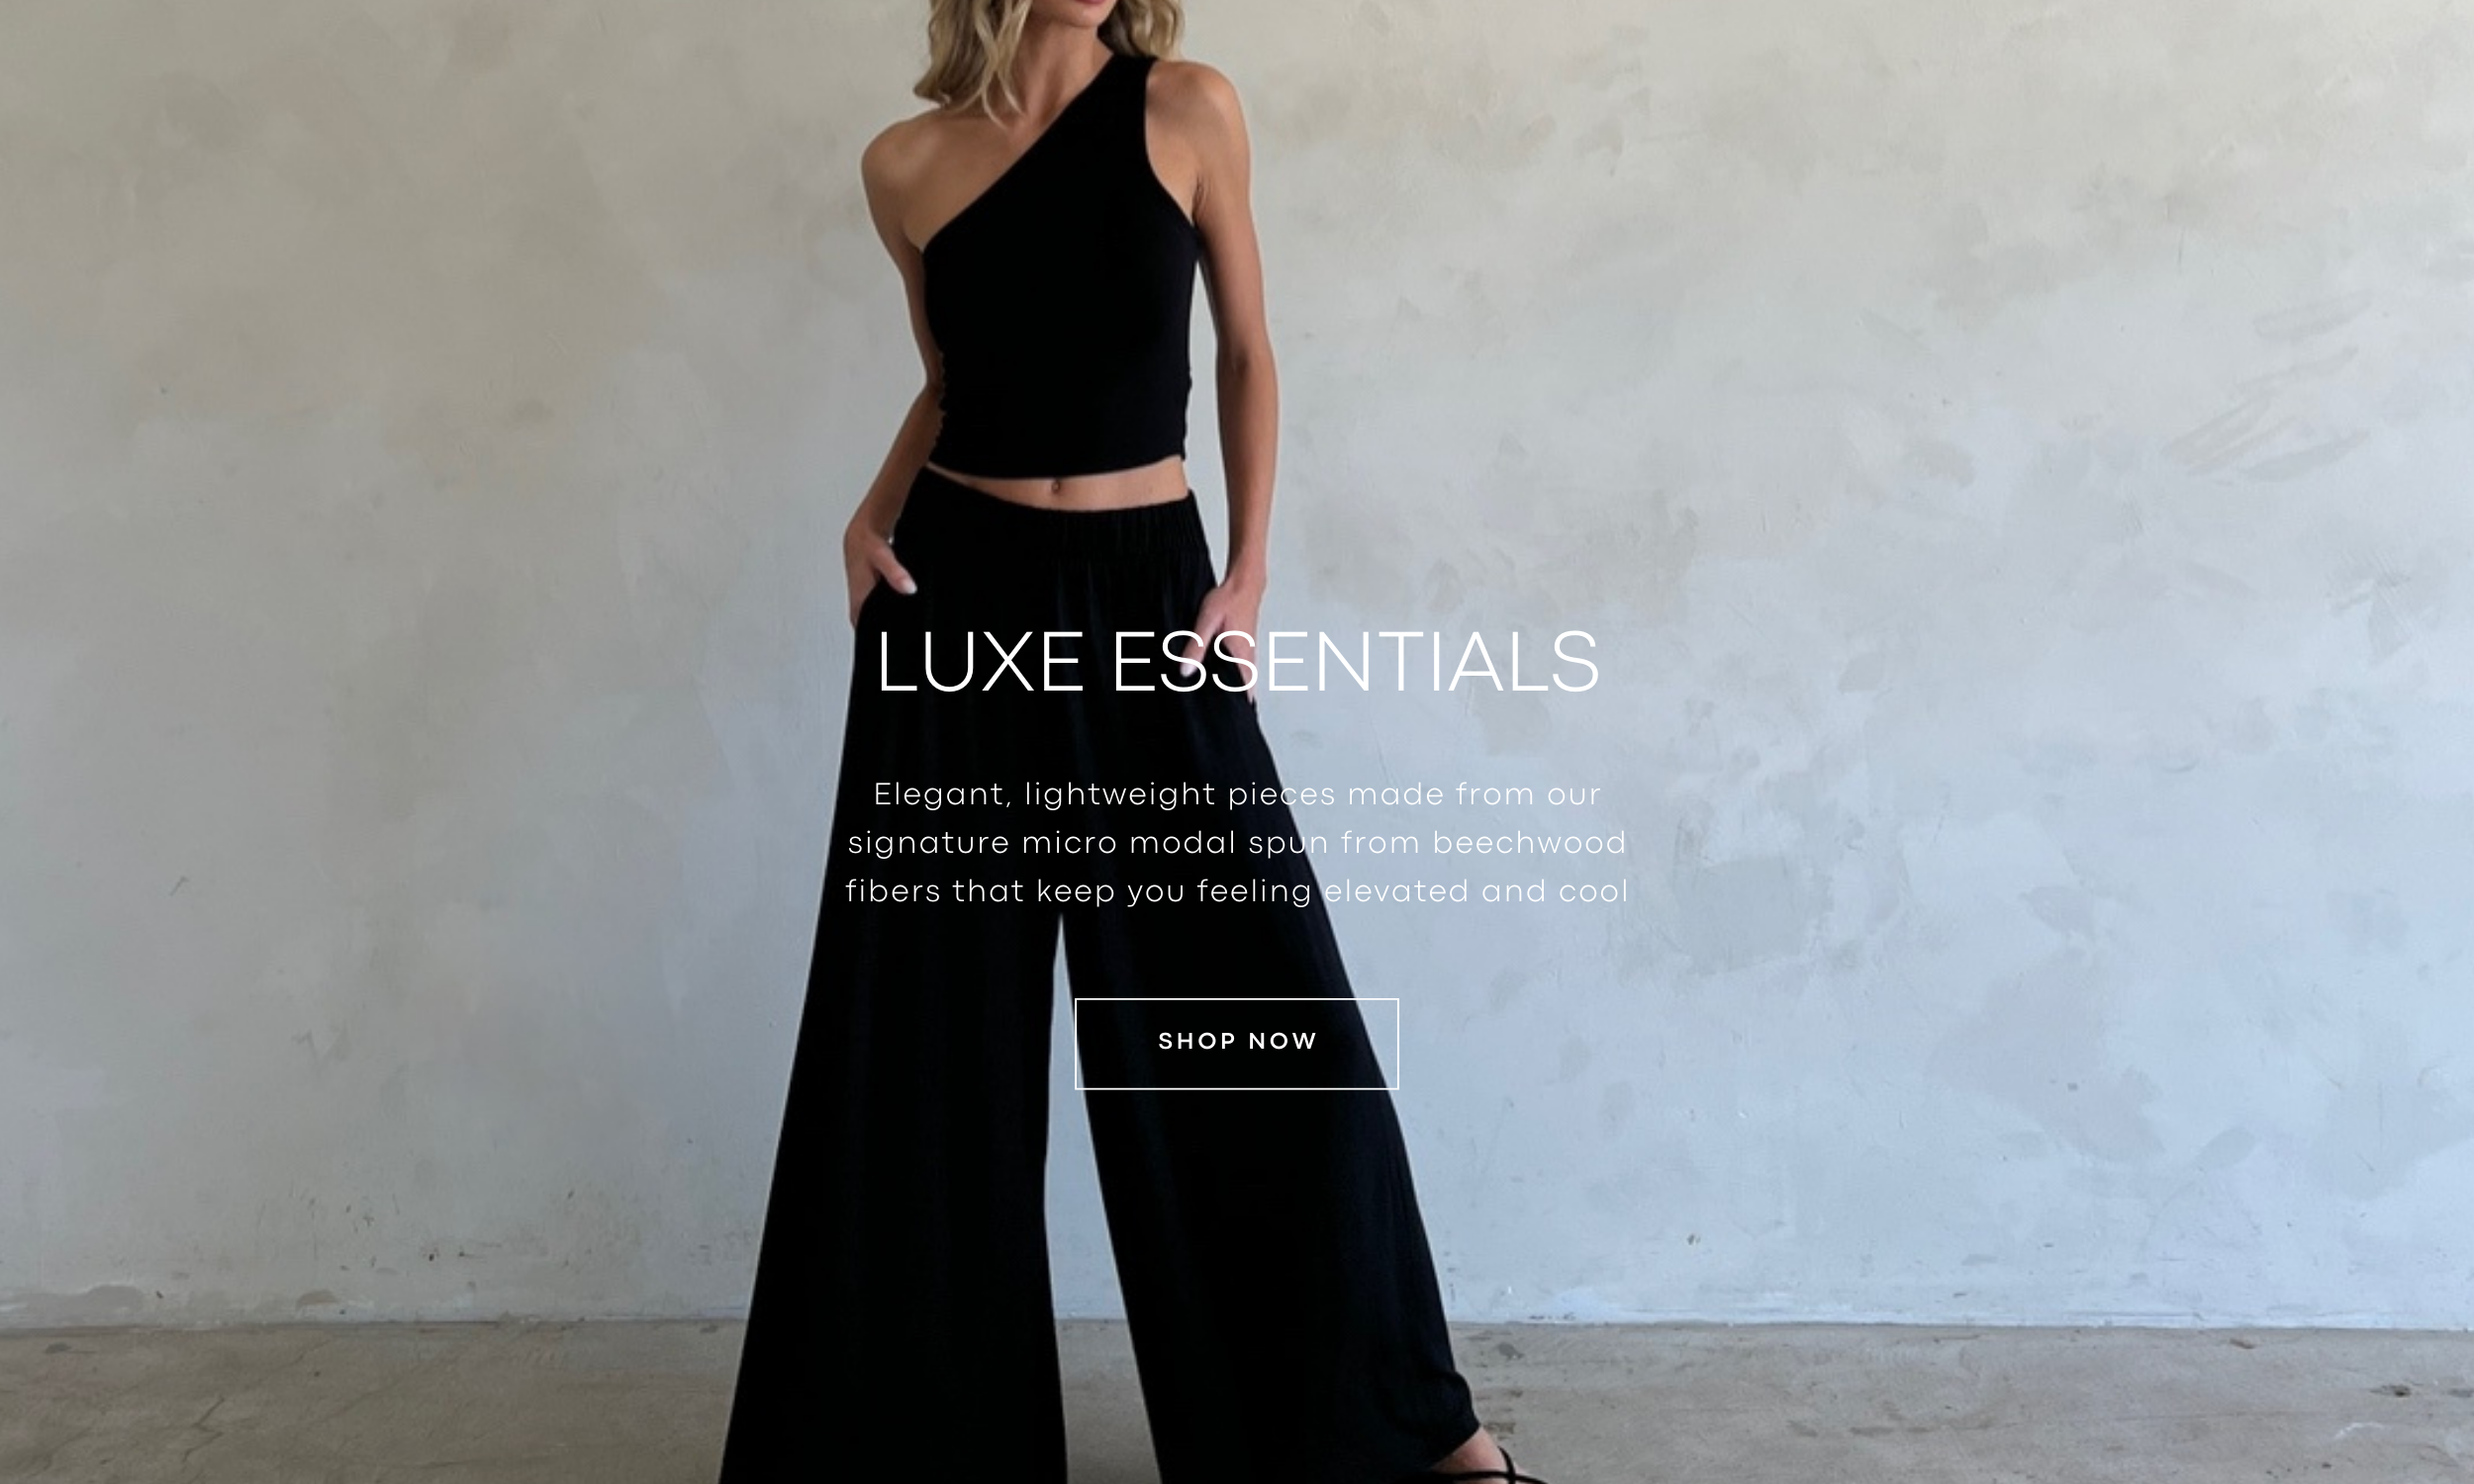 Luxe resort essentials. Elegant, lightweight pieces made from our signature micro modal spun from beechwood fibers that keep you feeling elevated and cool.  Shop now.